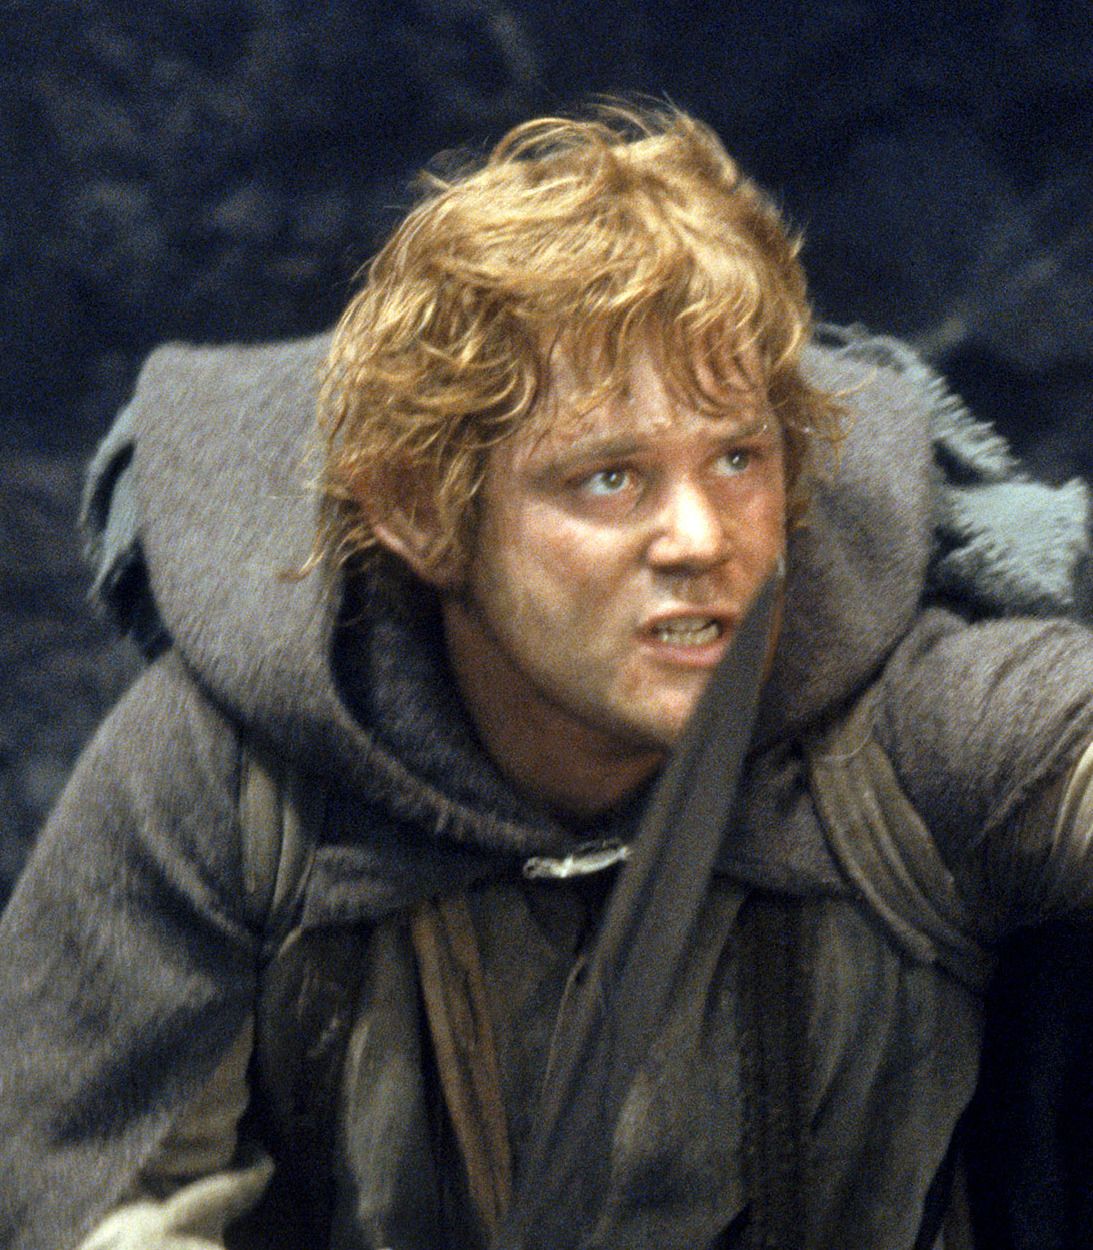 The Lord of the Rings Samwise Gamgee Sean Astin Vertical